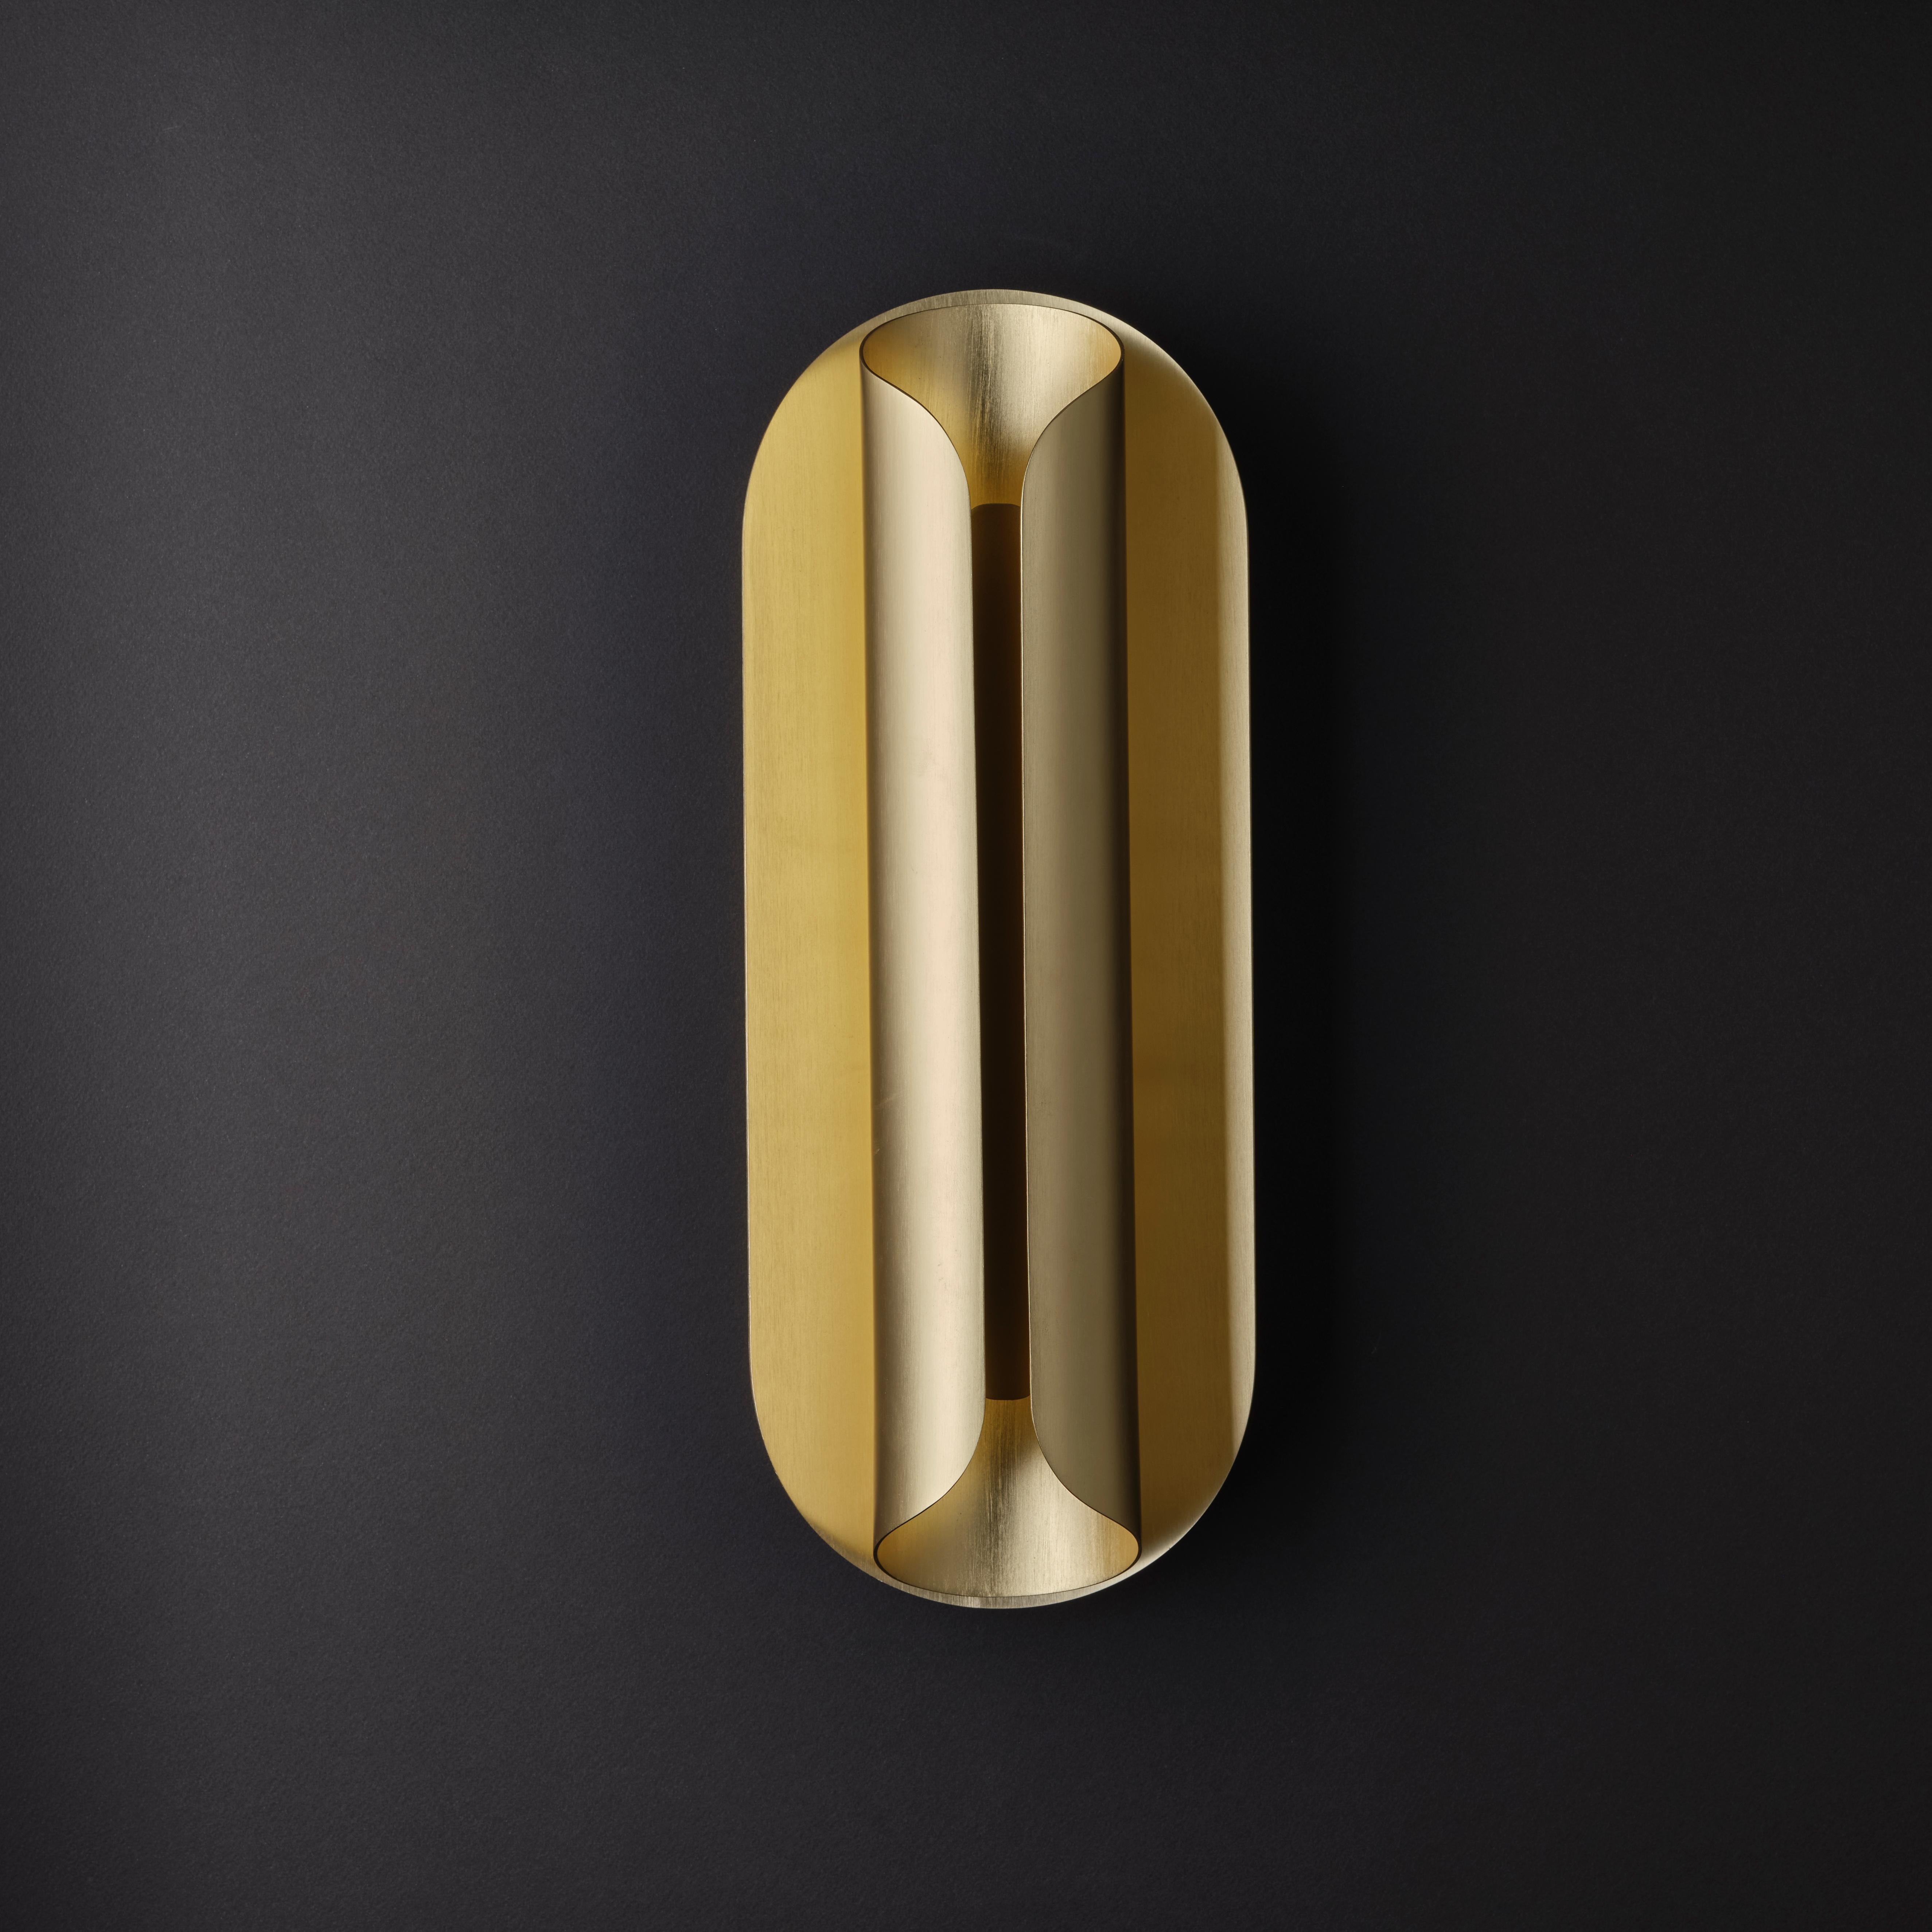 Aluminum DCW Editions Rosalie Wall Lamp in Gold Aluminium by Julie Fuillet For Sale